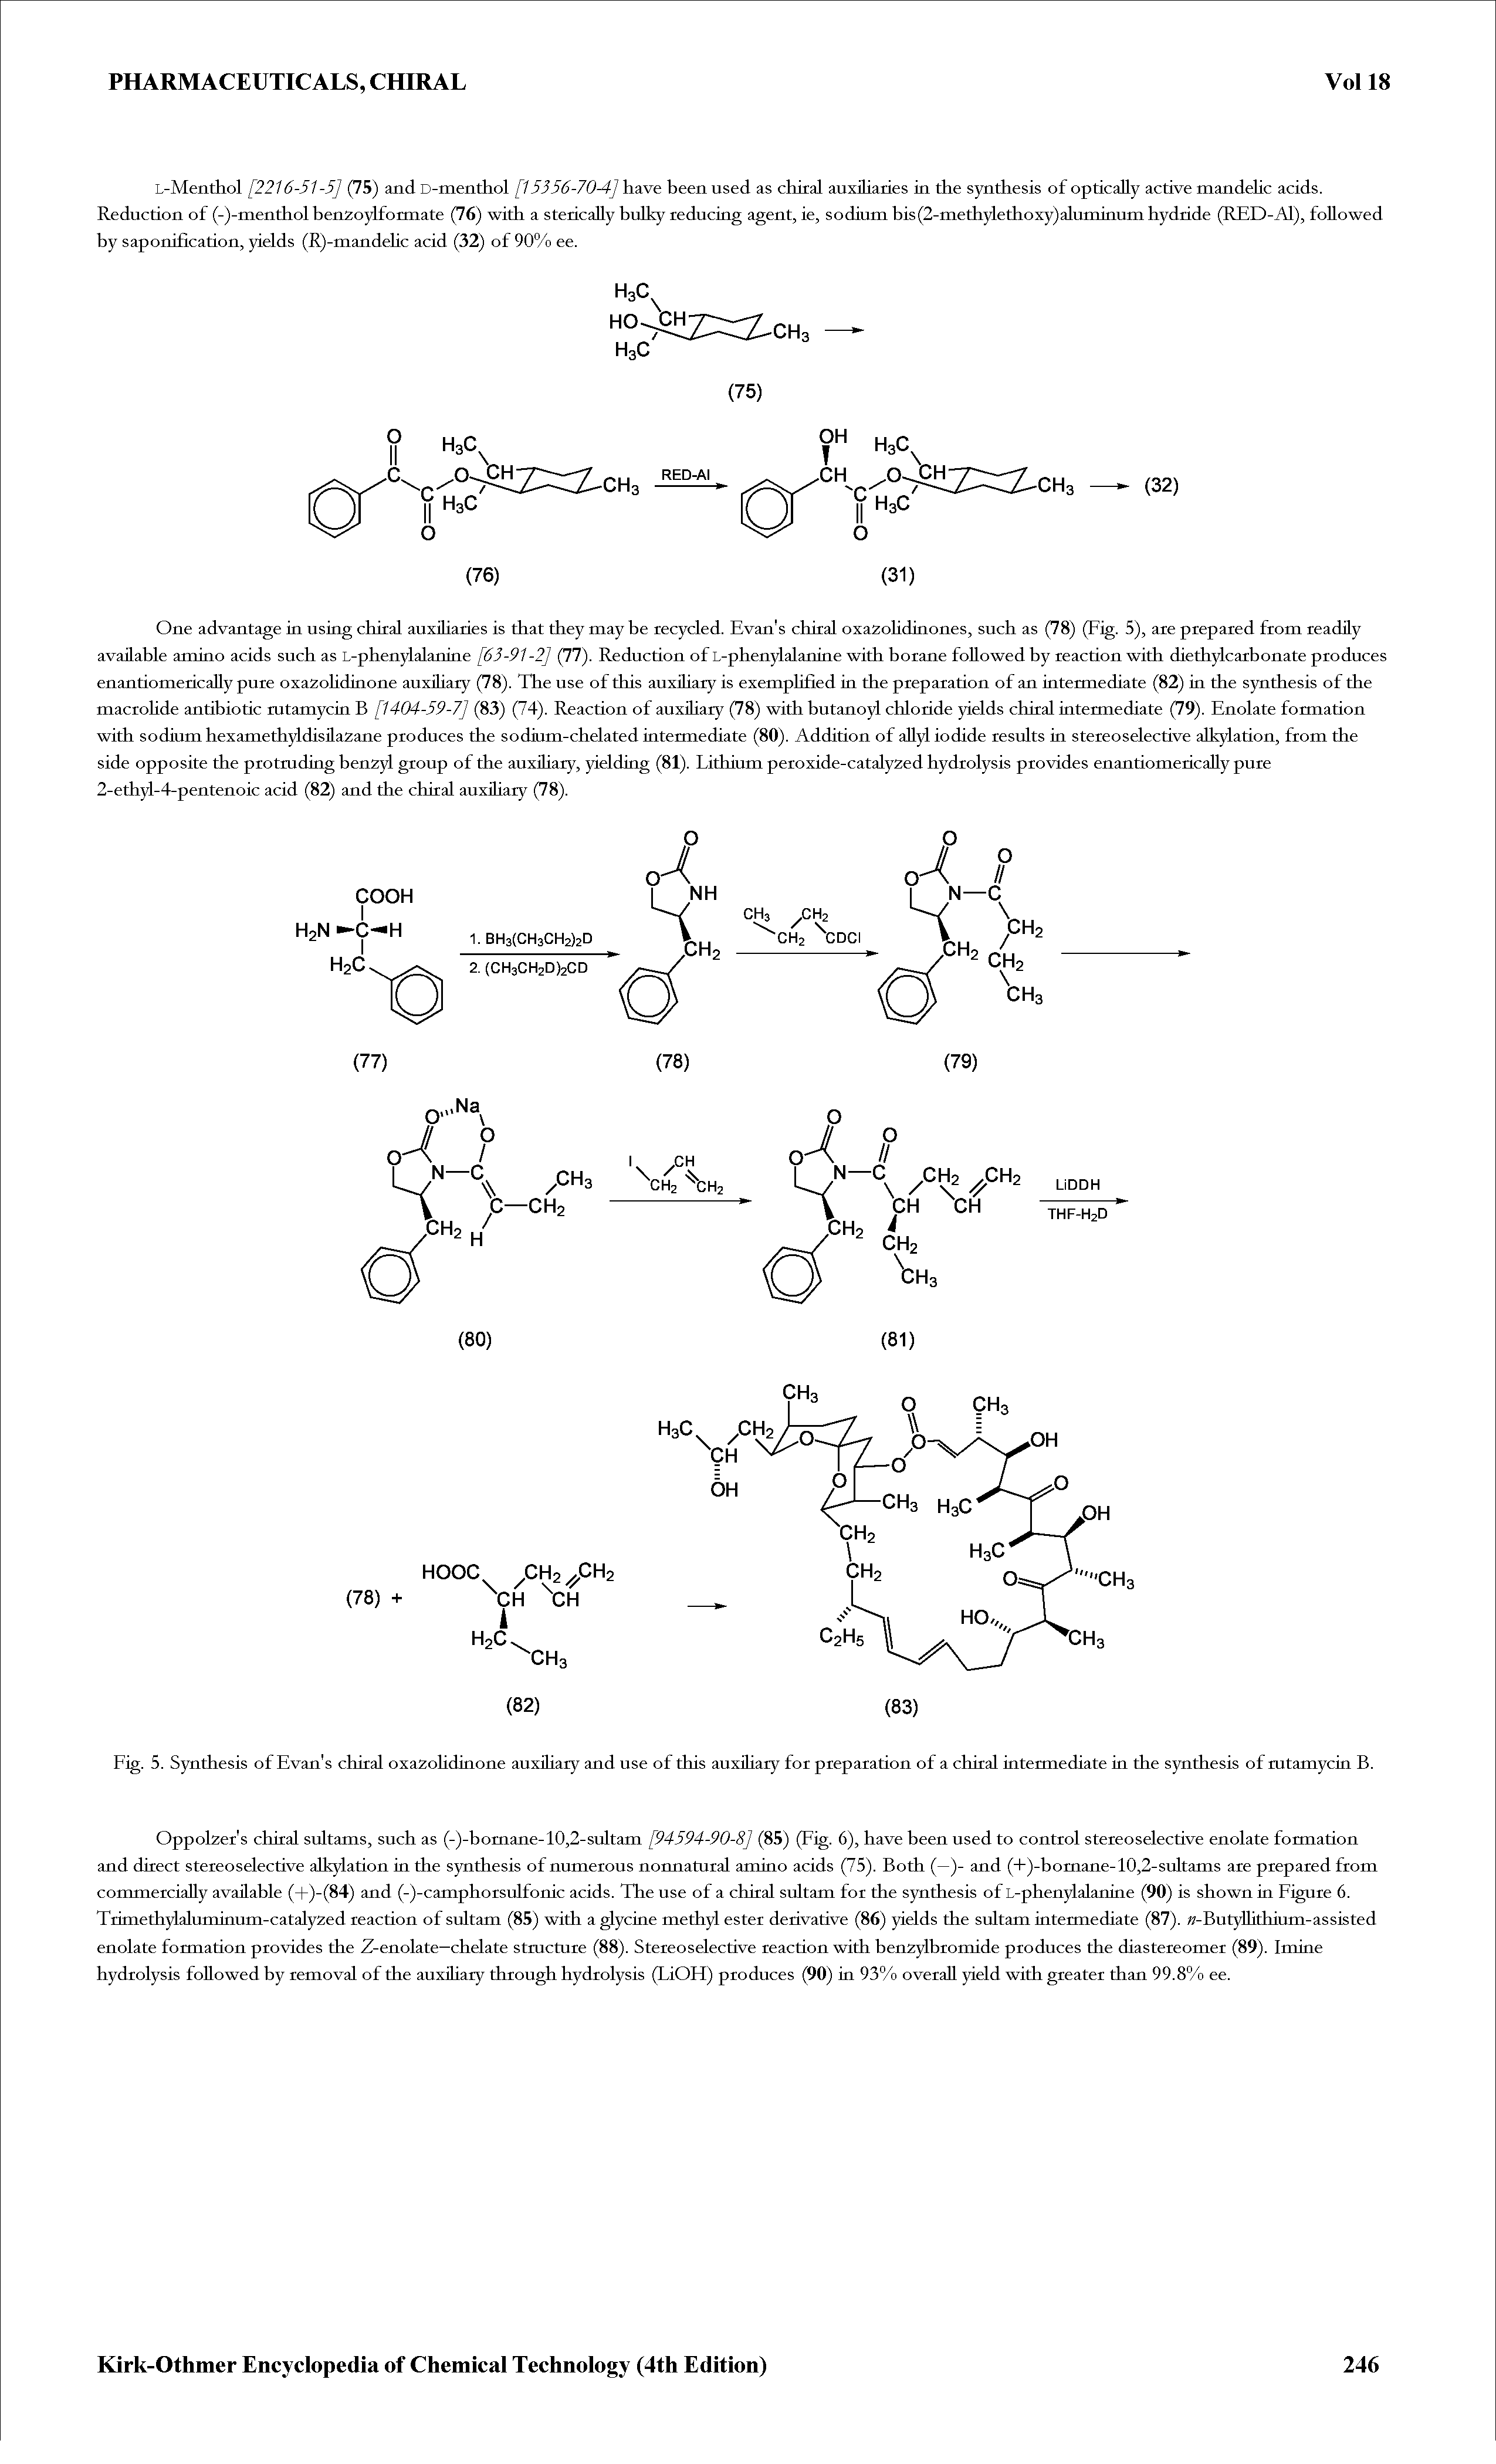 Fig. 5. Synthesis of Evan s chiral oxa2ohdinone auxiUary and use of this auxiUary for preparation of a chiral intermediate in the synthesis of mtamycin B.